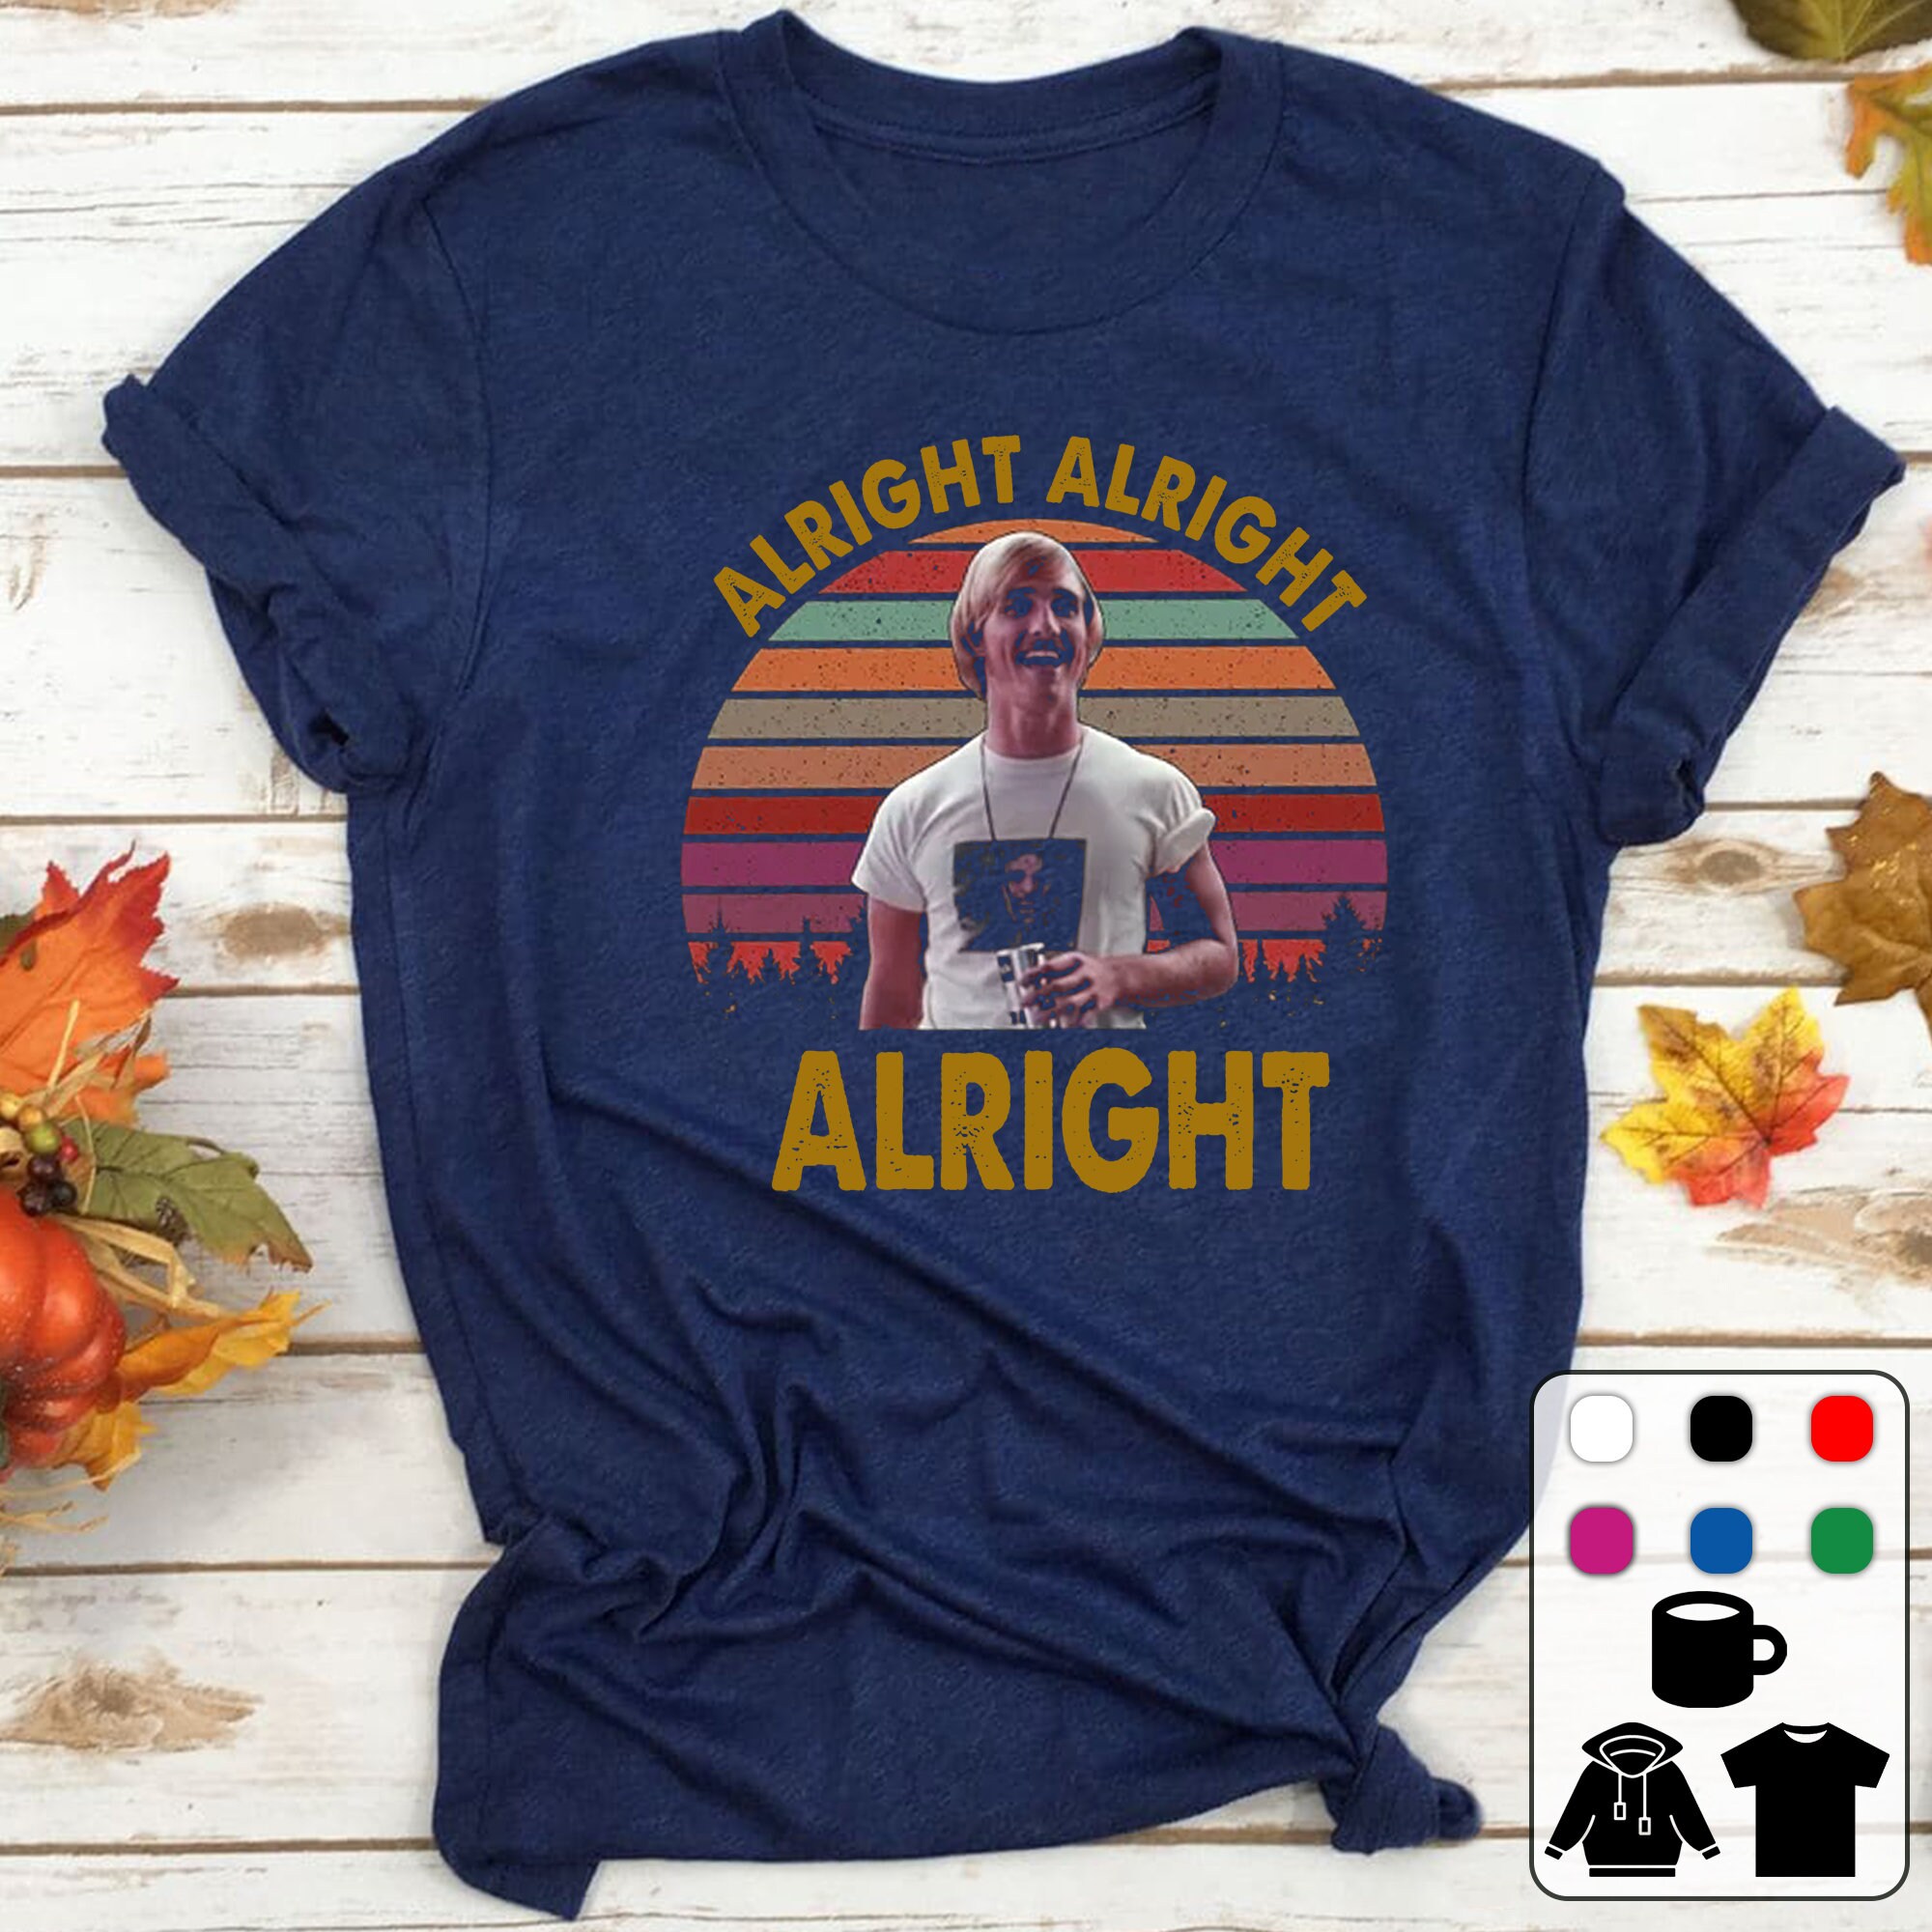 Alright - Alright - Alright, David Wooderson Dazed And Confused Shirt, 90s Vintage Retro Movie T Shirt